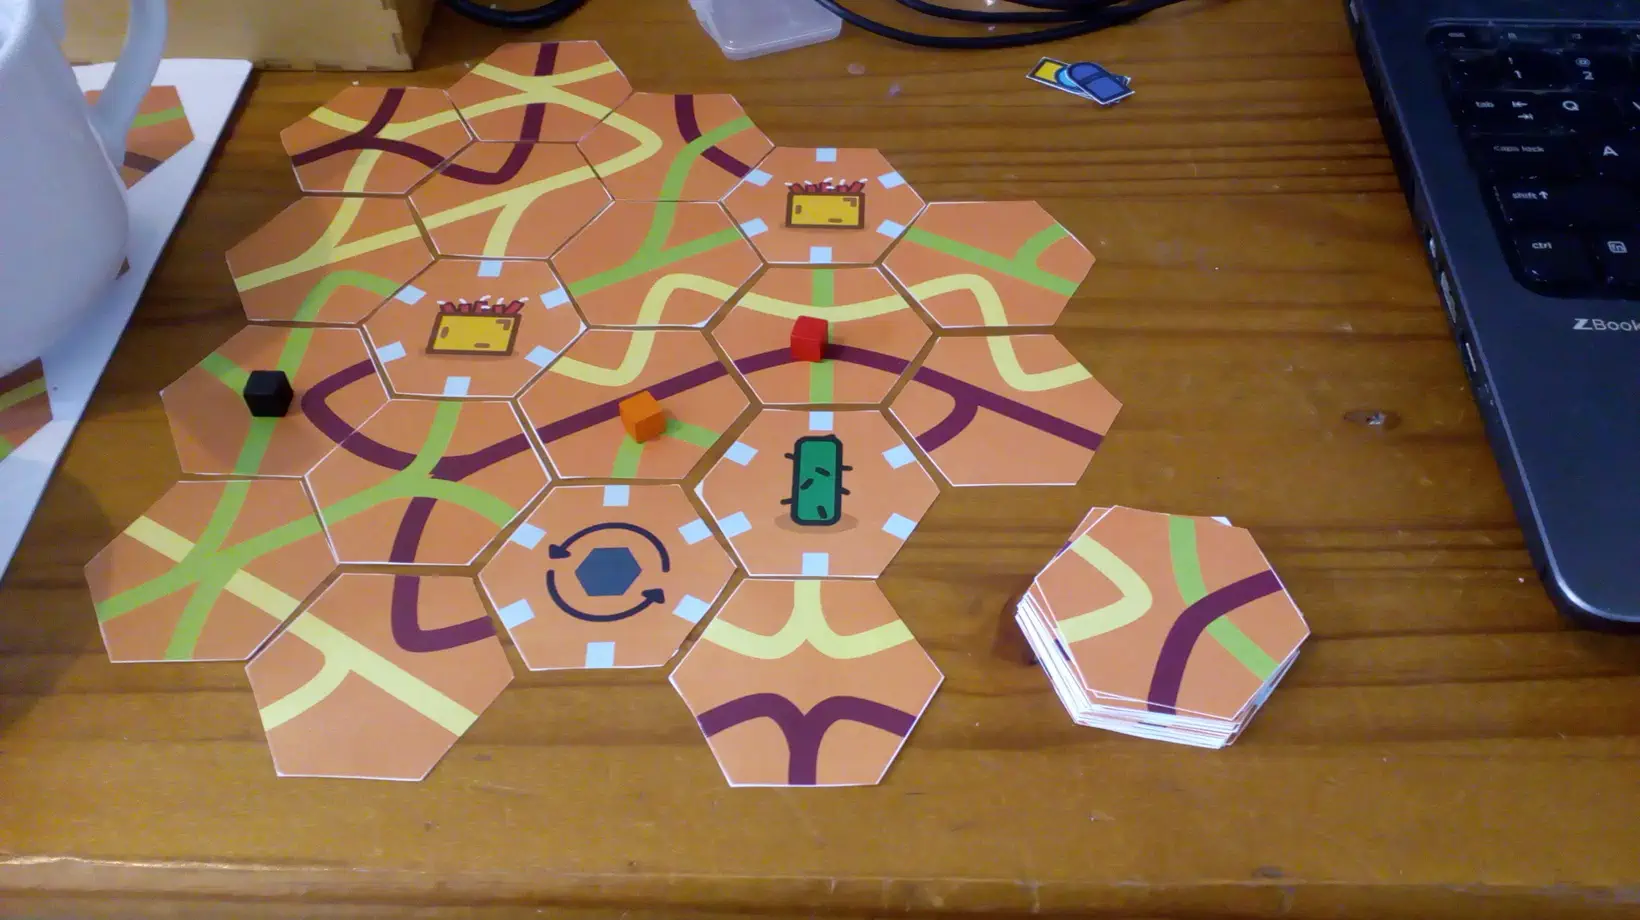 Example game board (during play, prototype stage)